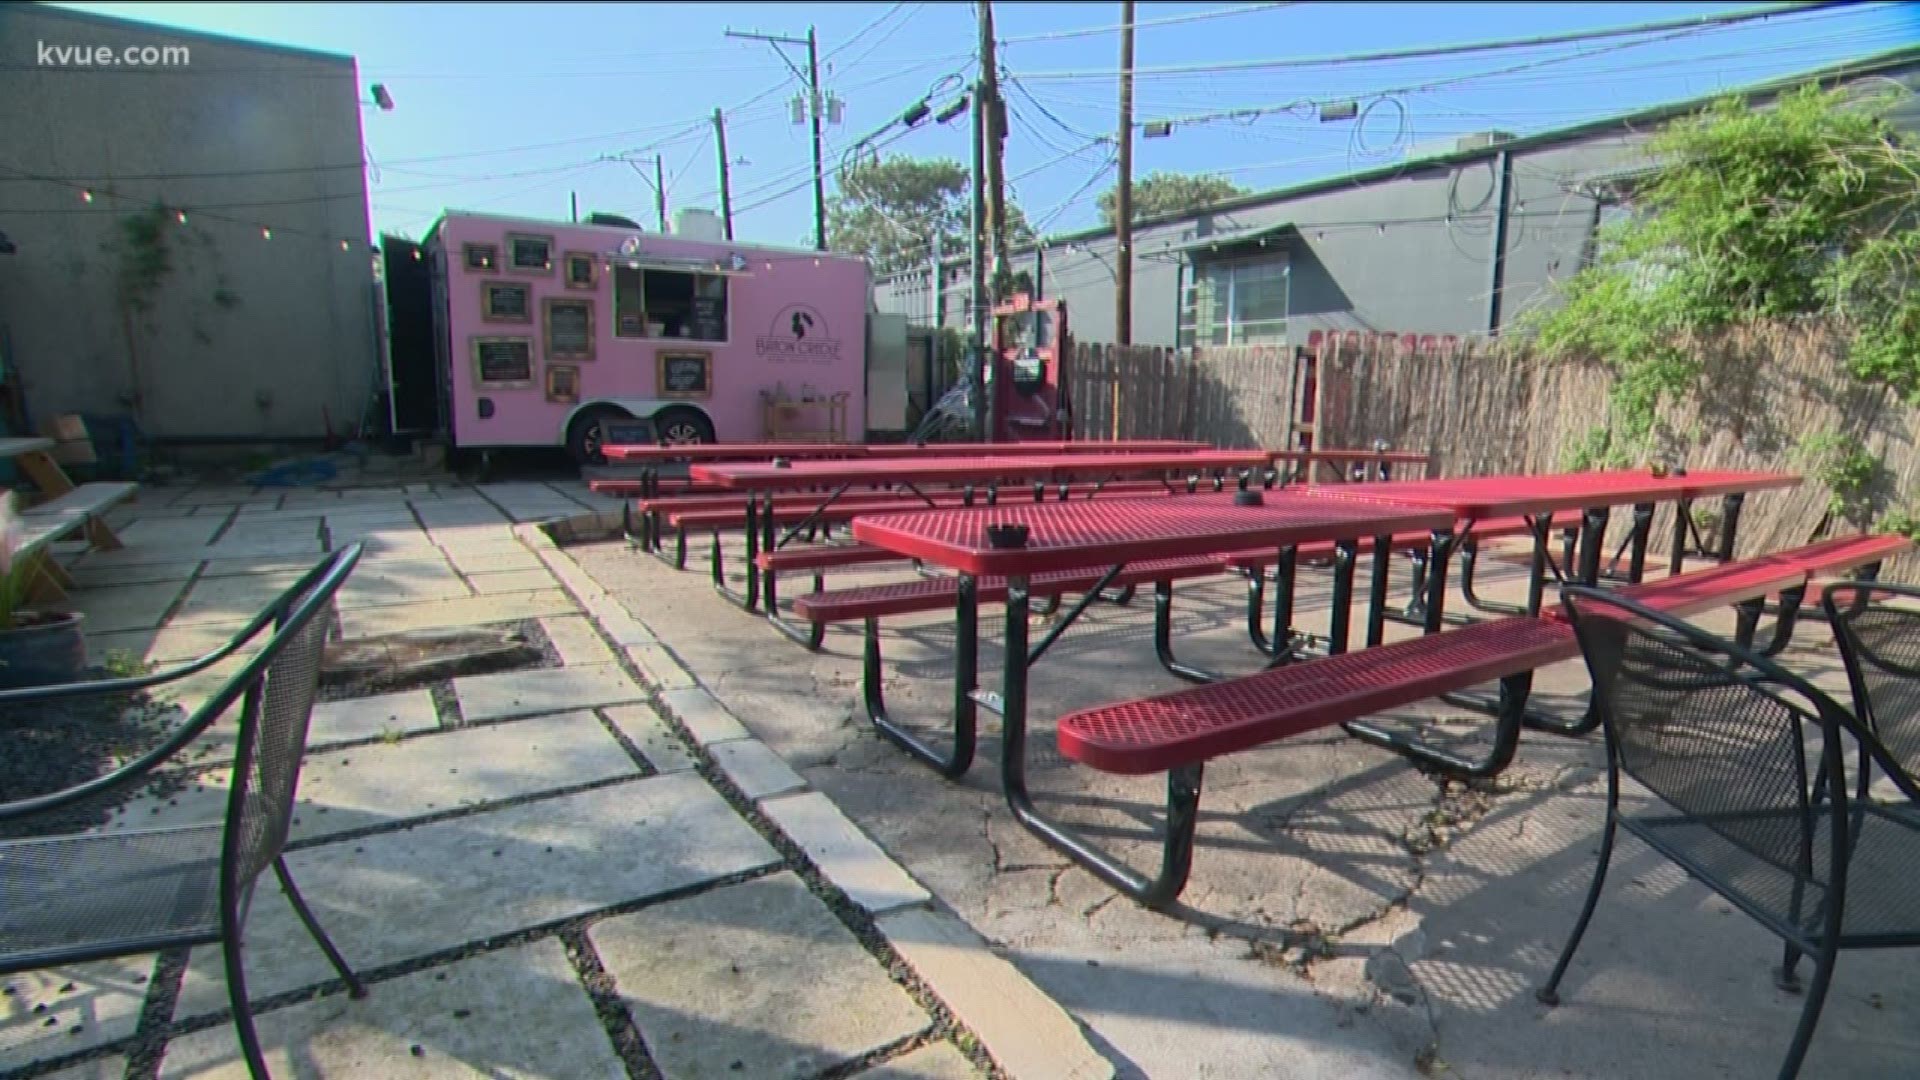 A lot of service industry employees are out of work. But a food truck in East Austin is stepping in to help.